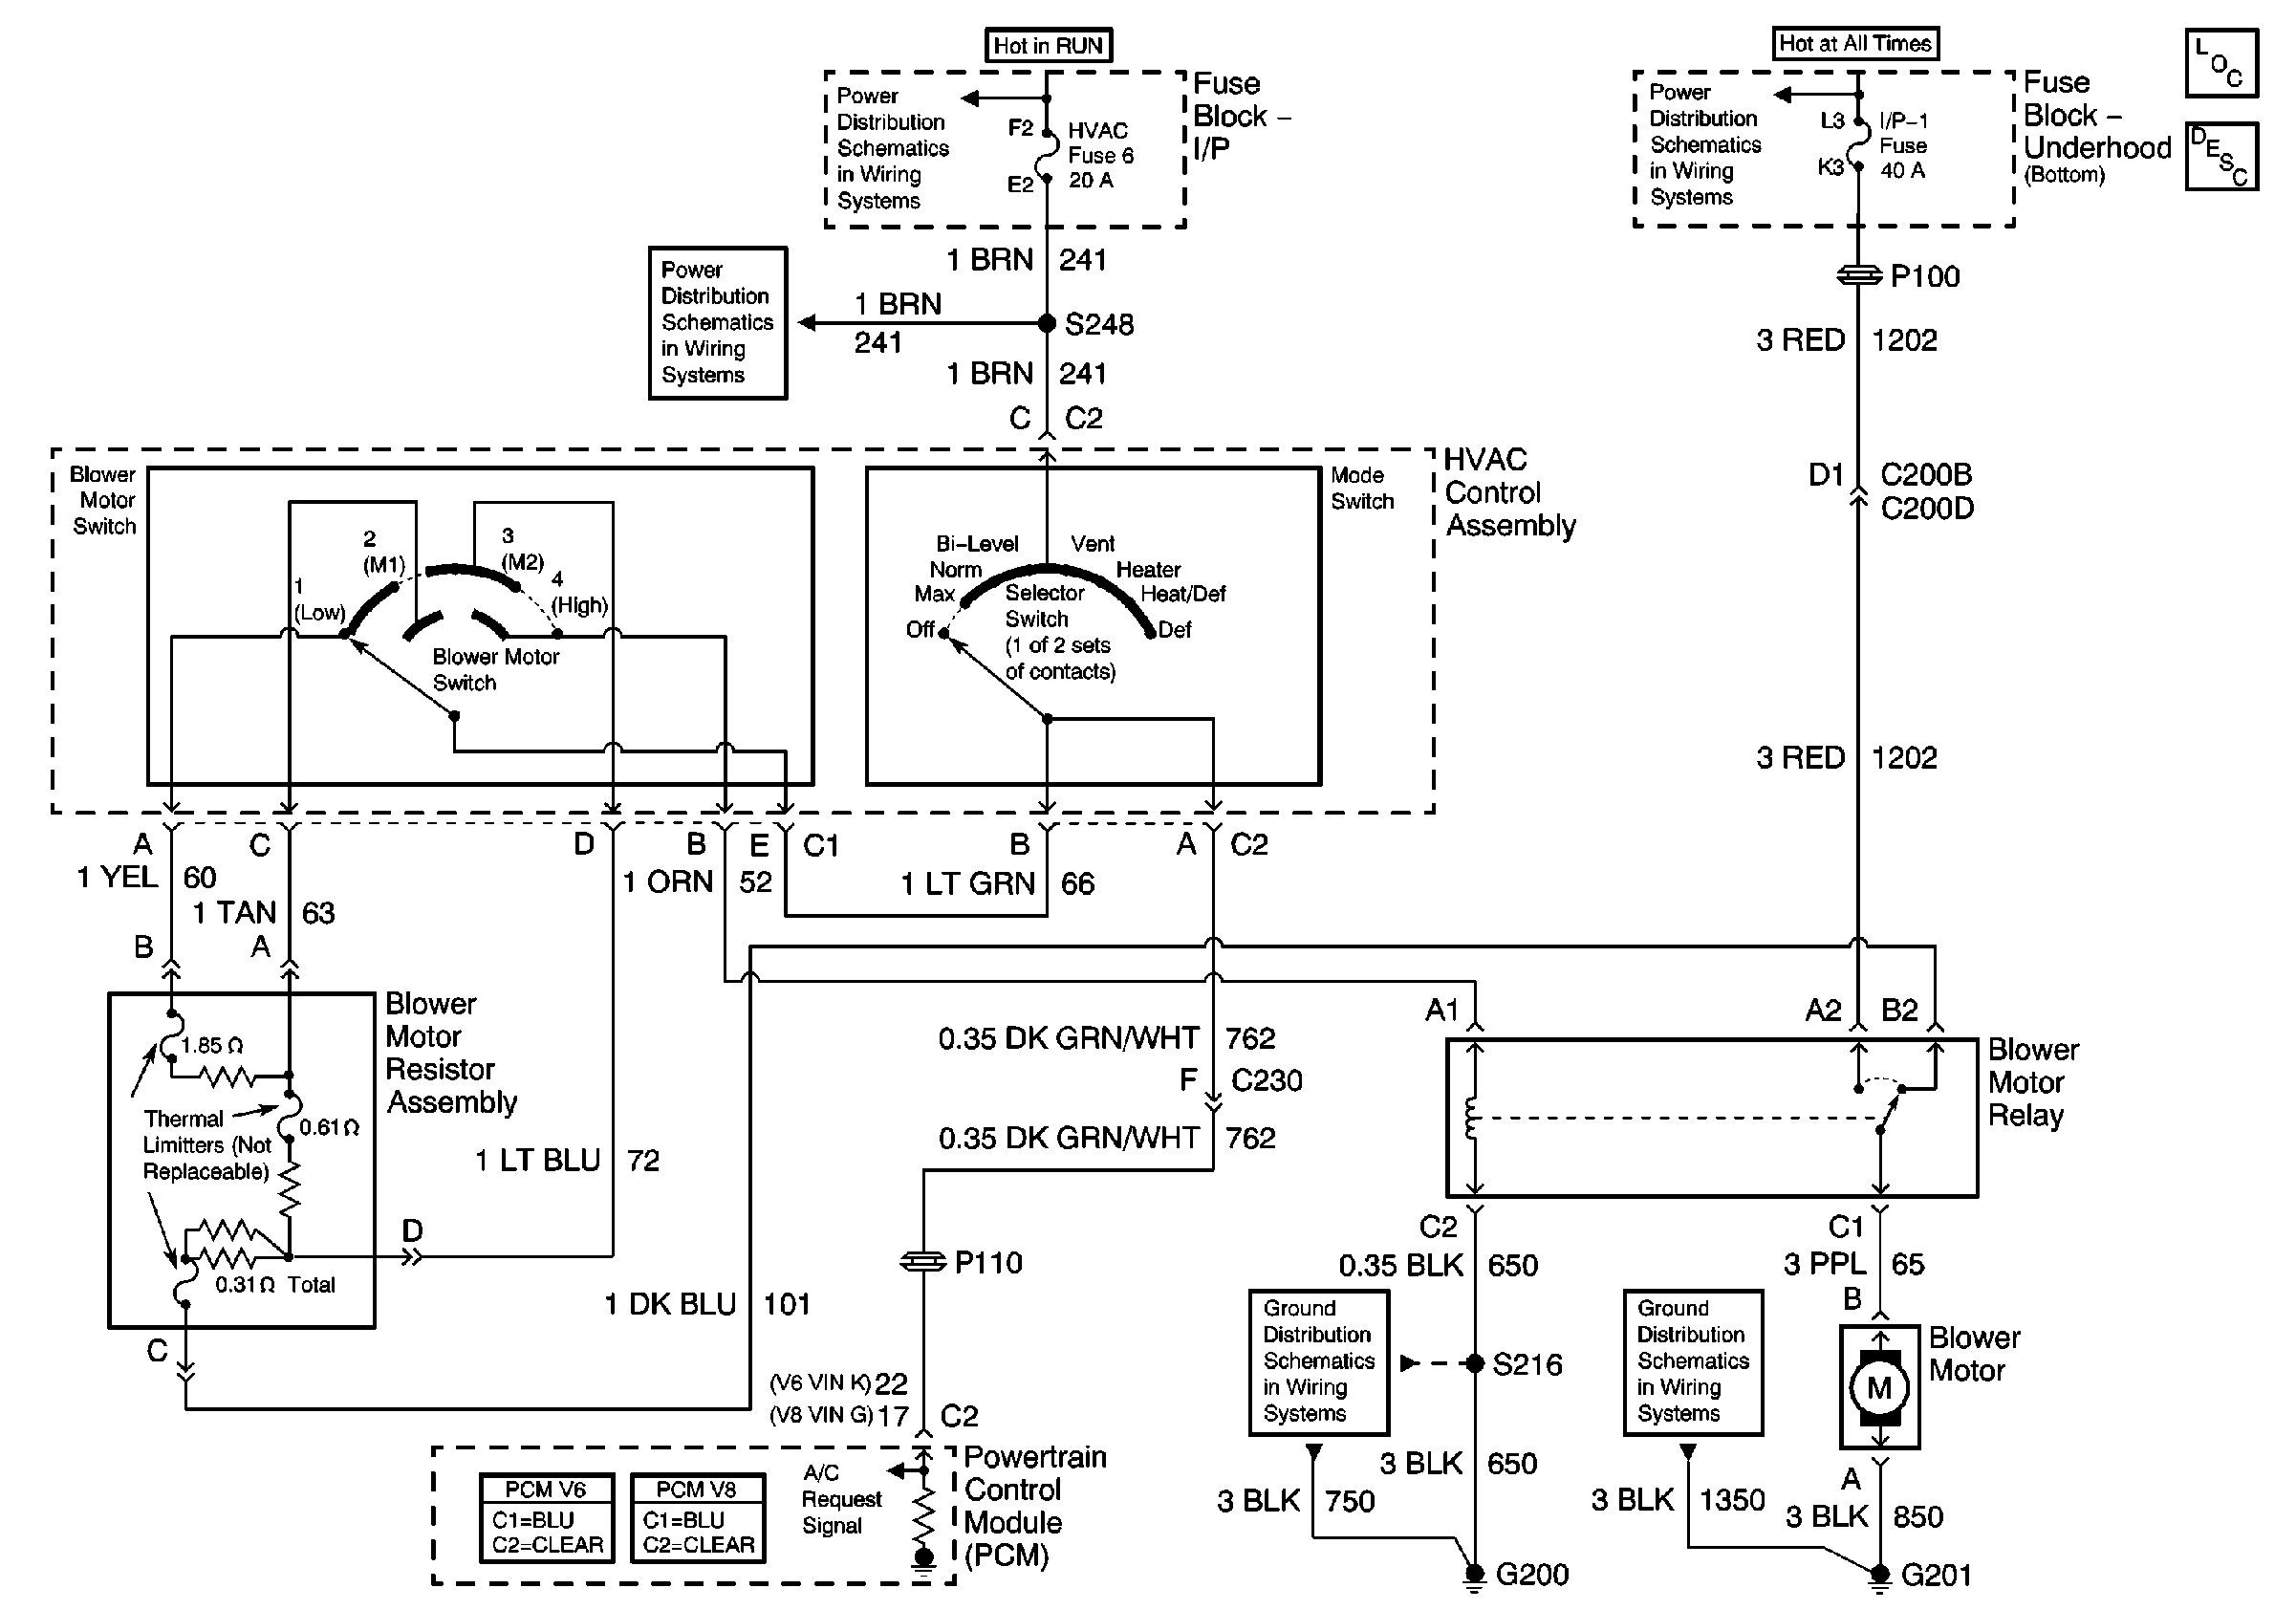 Wiring Diagram For A House from ls1tech.com